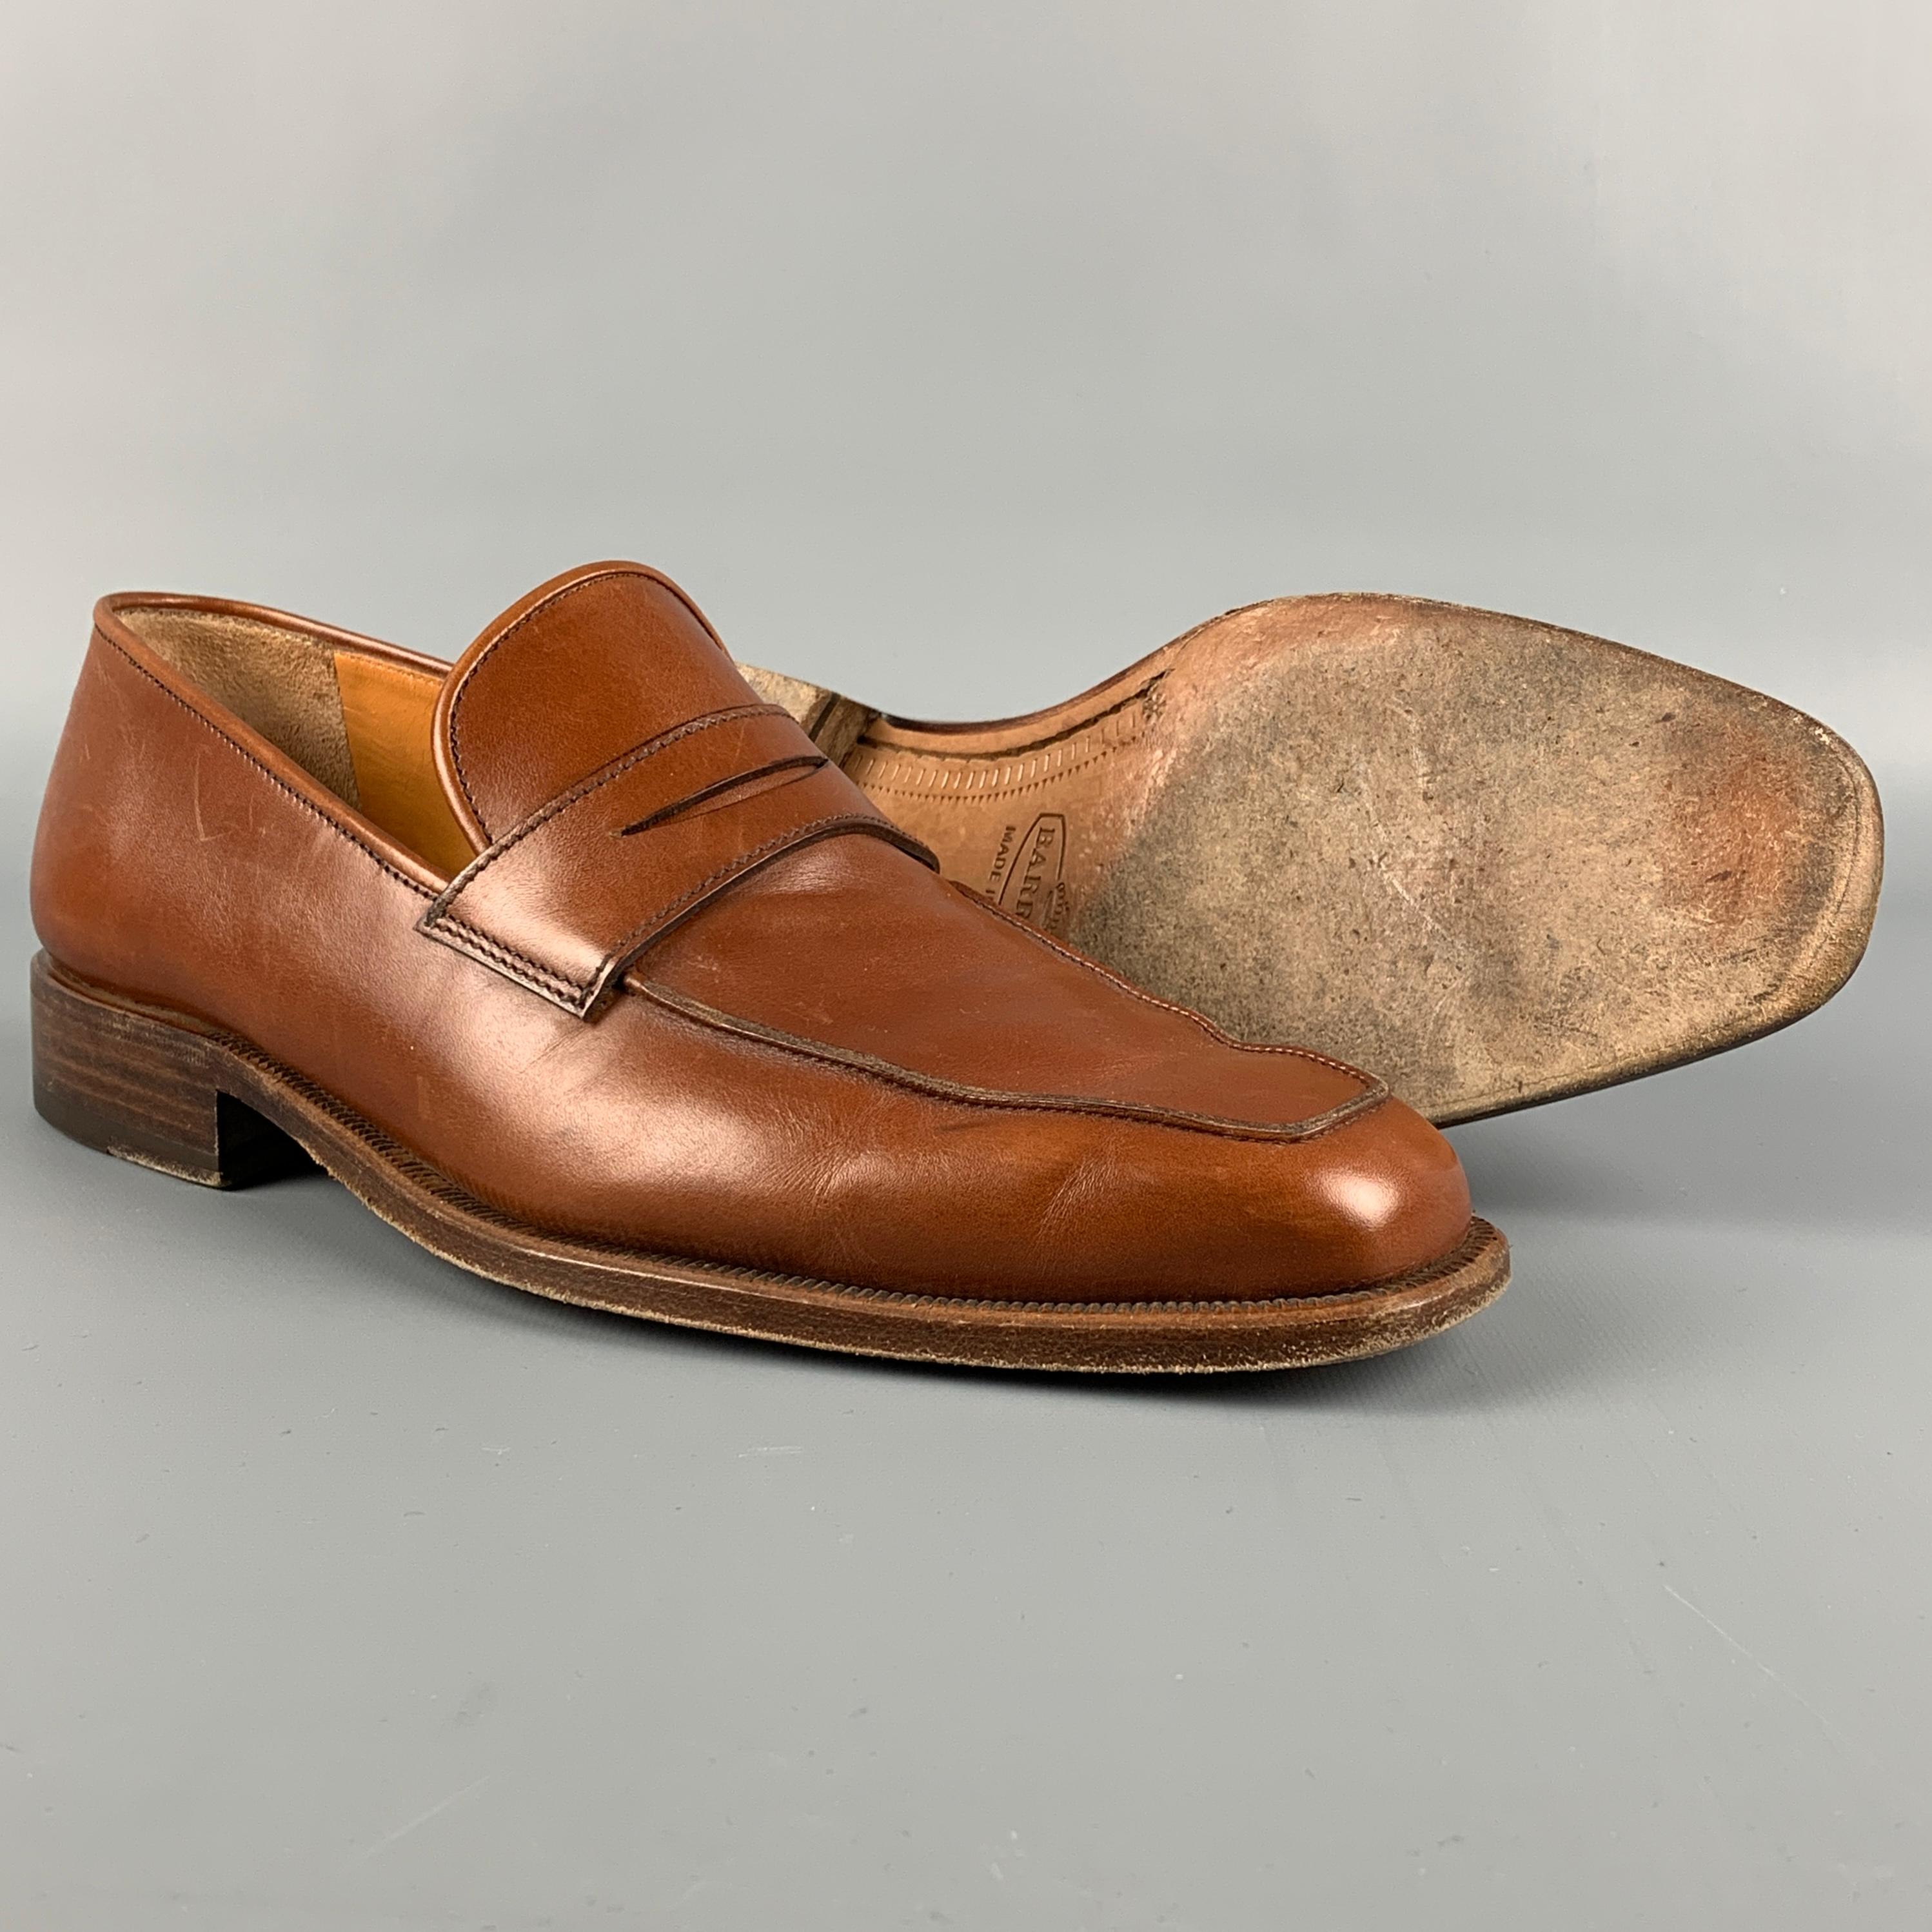 light tan loafers